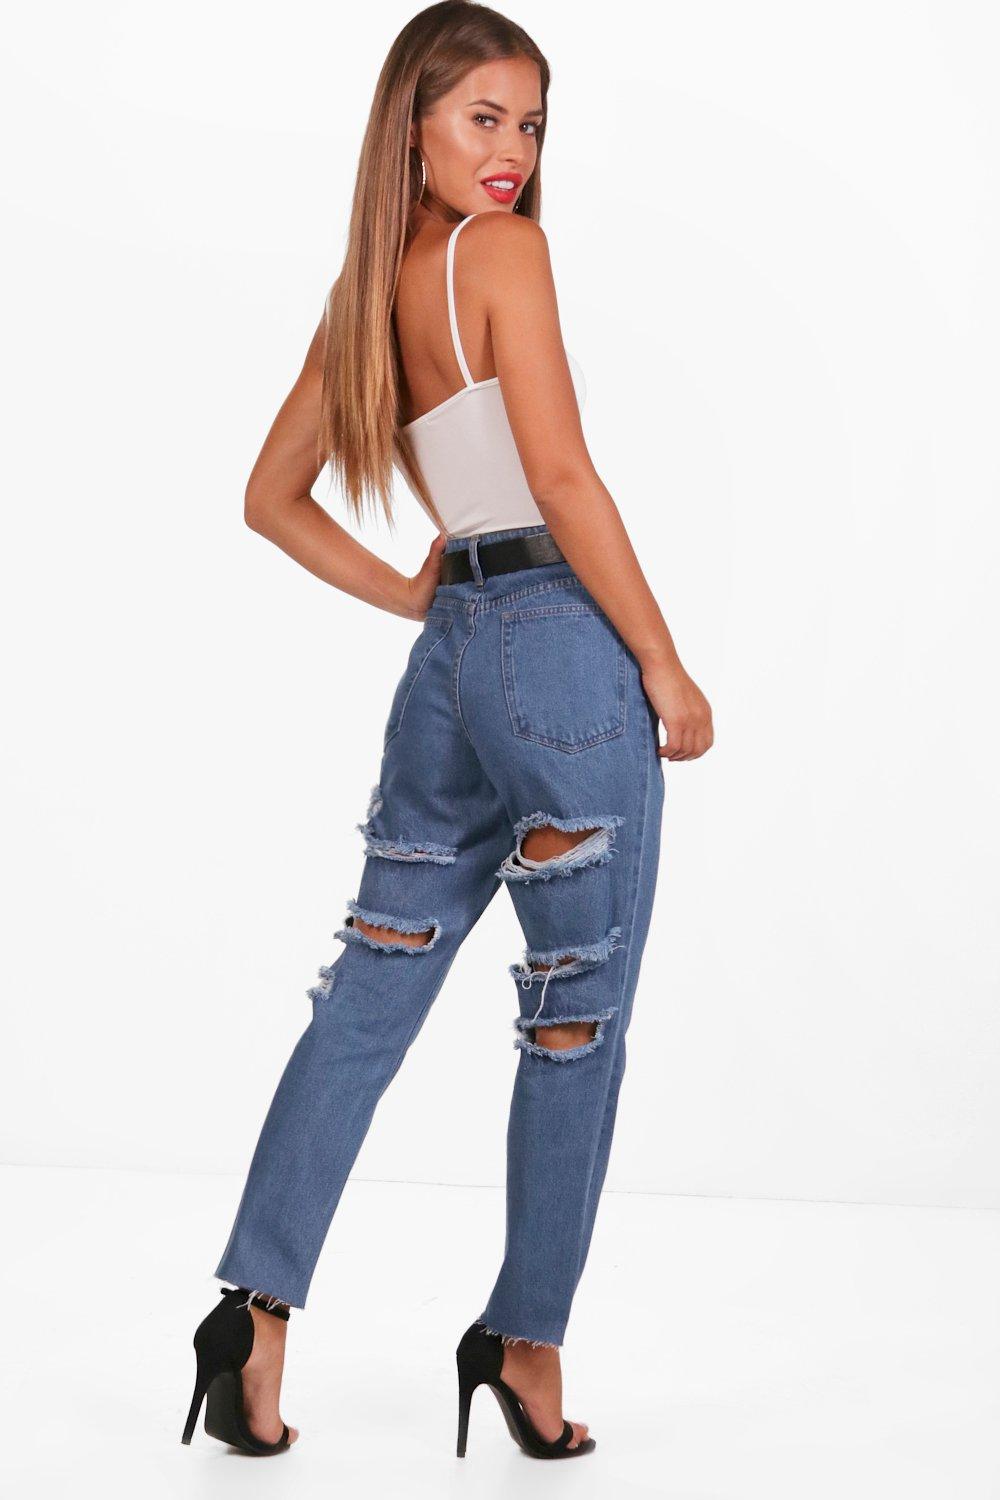 jeans that are ripped in the back